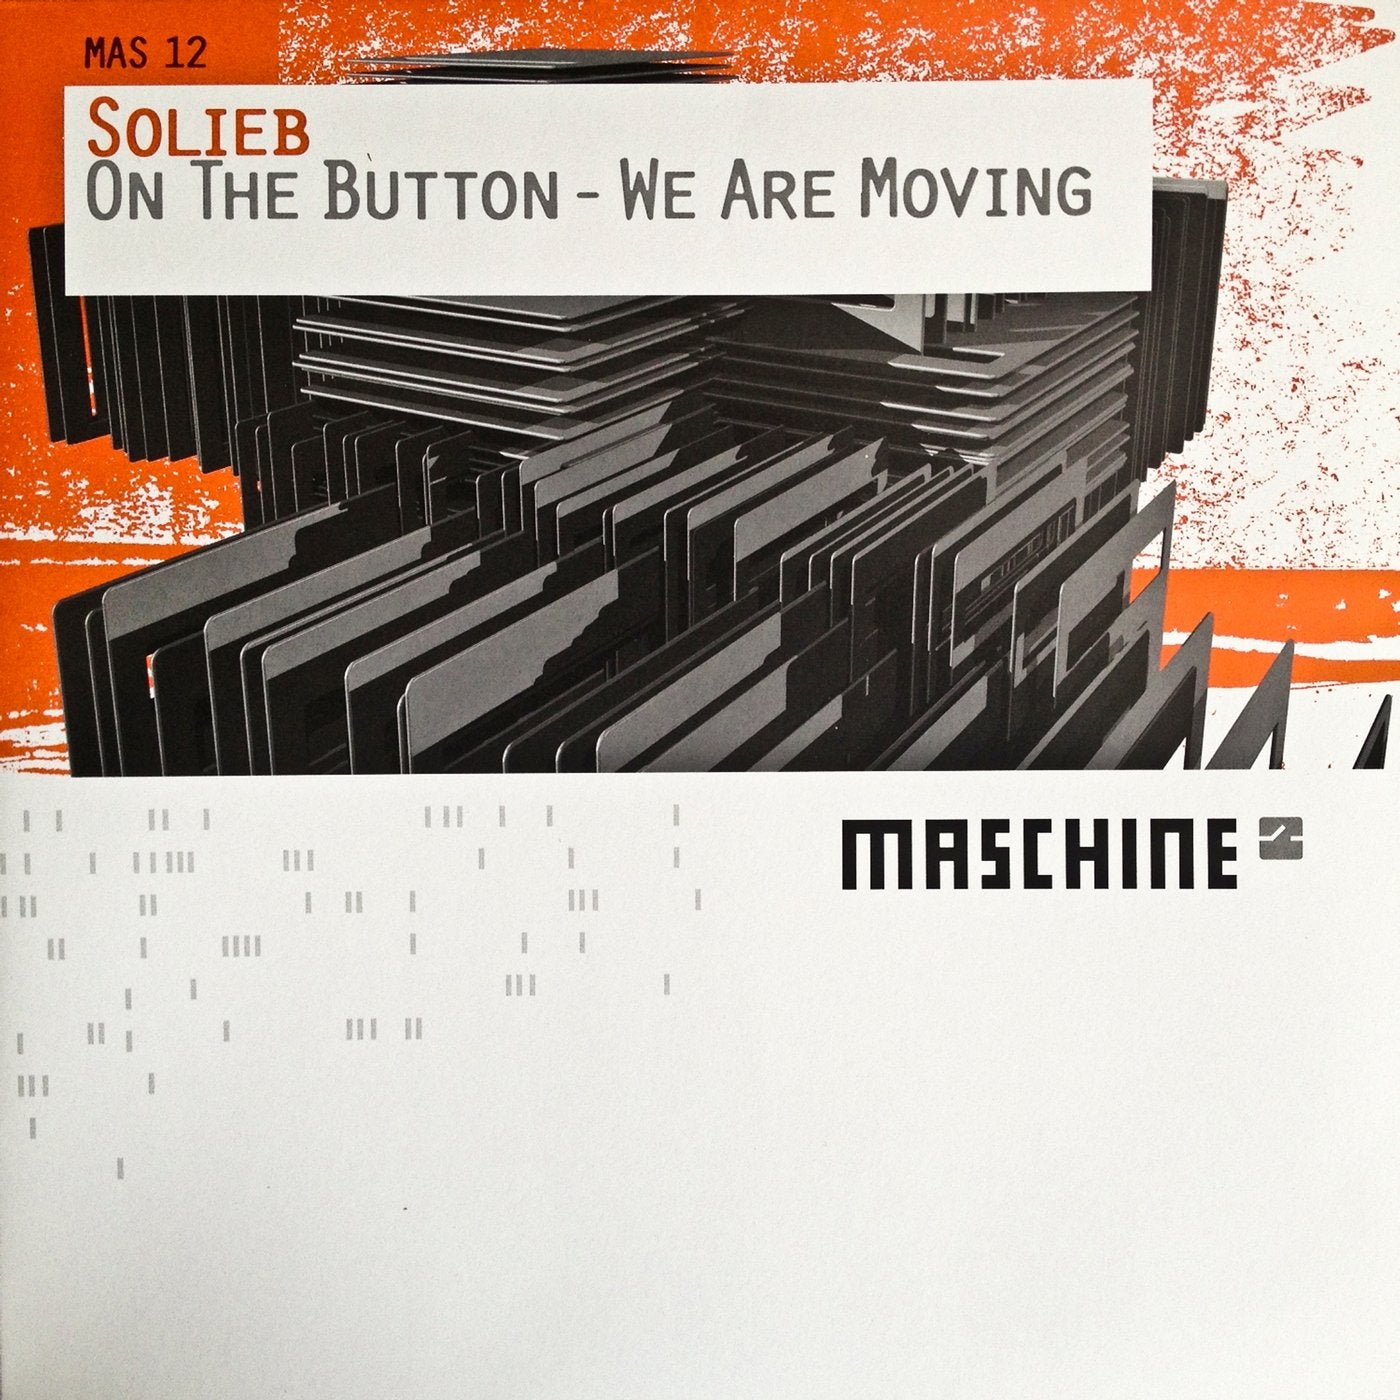 On the Button - We Are Moving